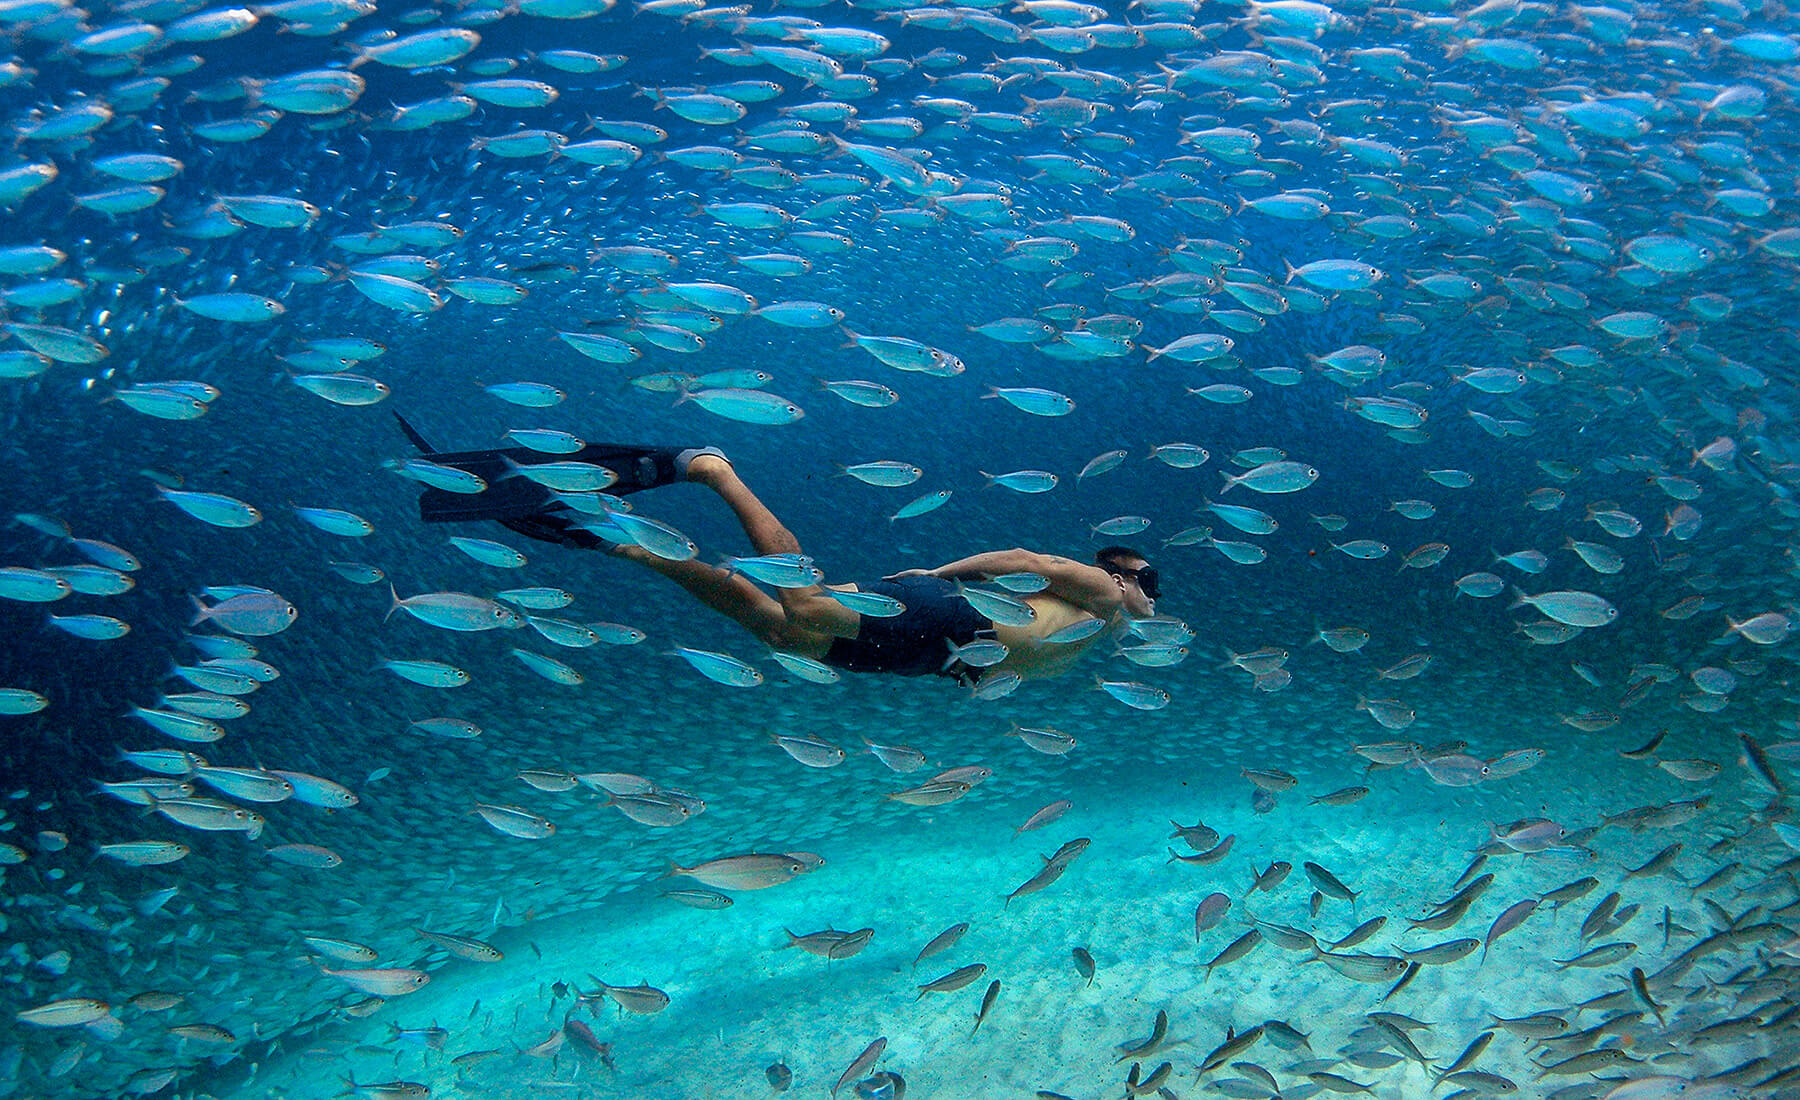 Freediving in a school of fish